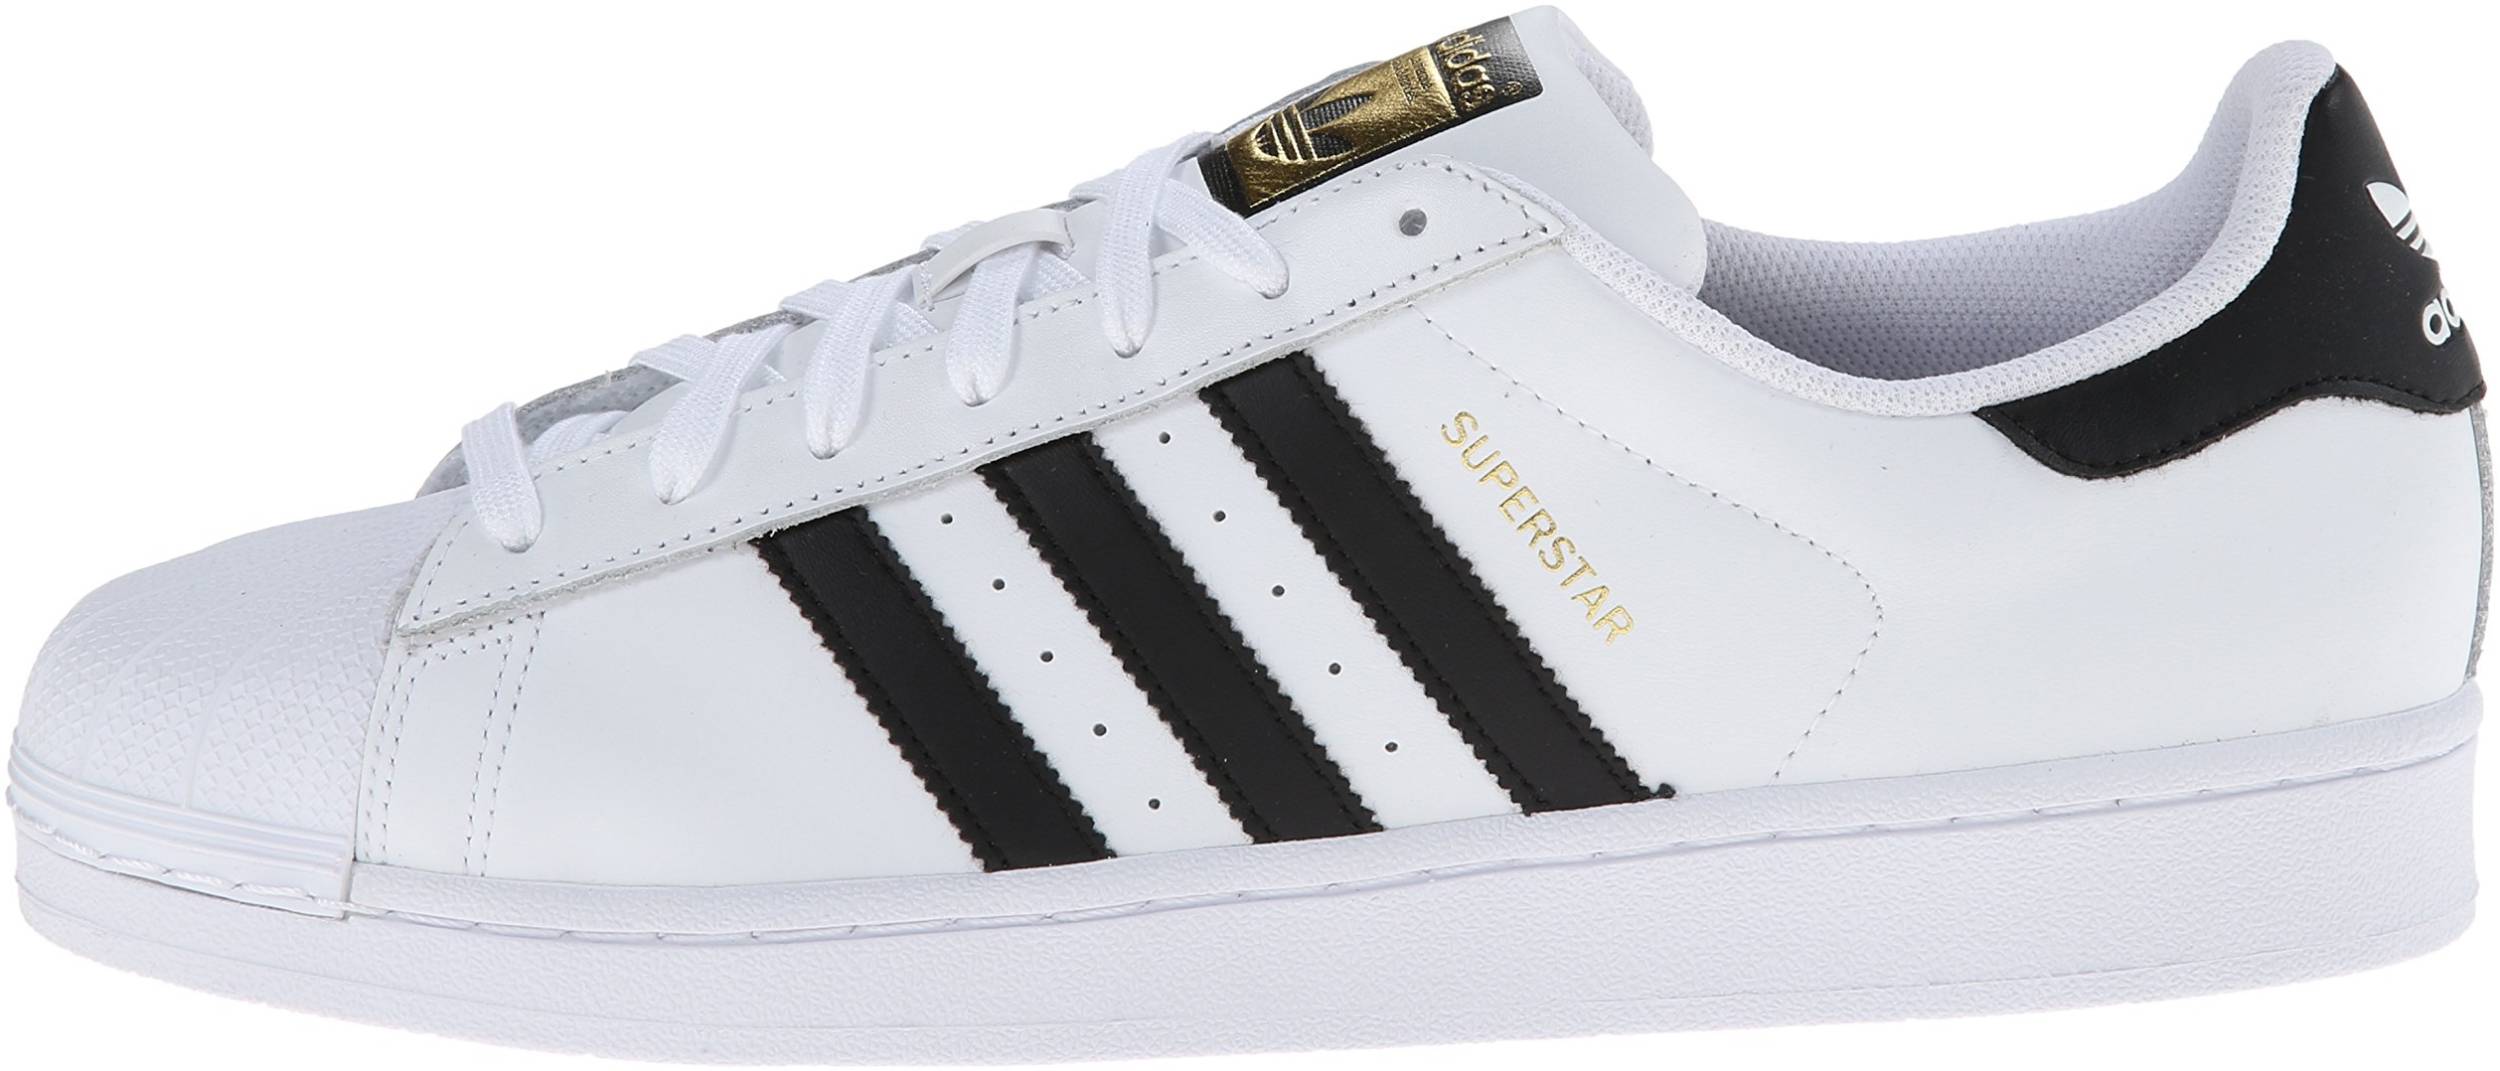 70+ colors Adidas Superstar (from $30) |